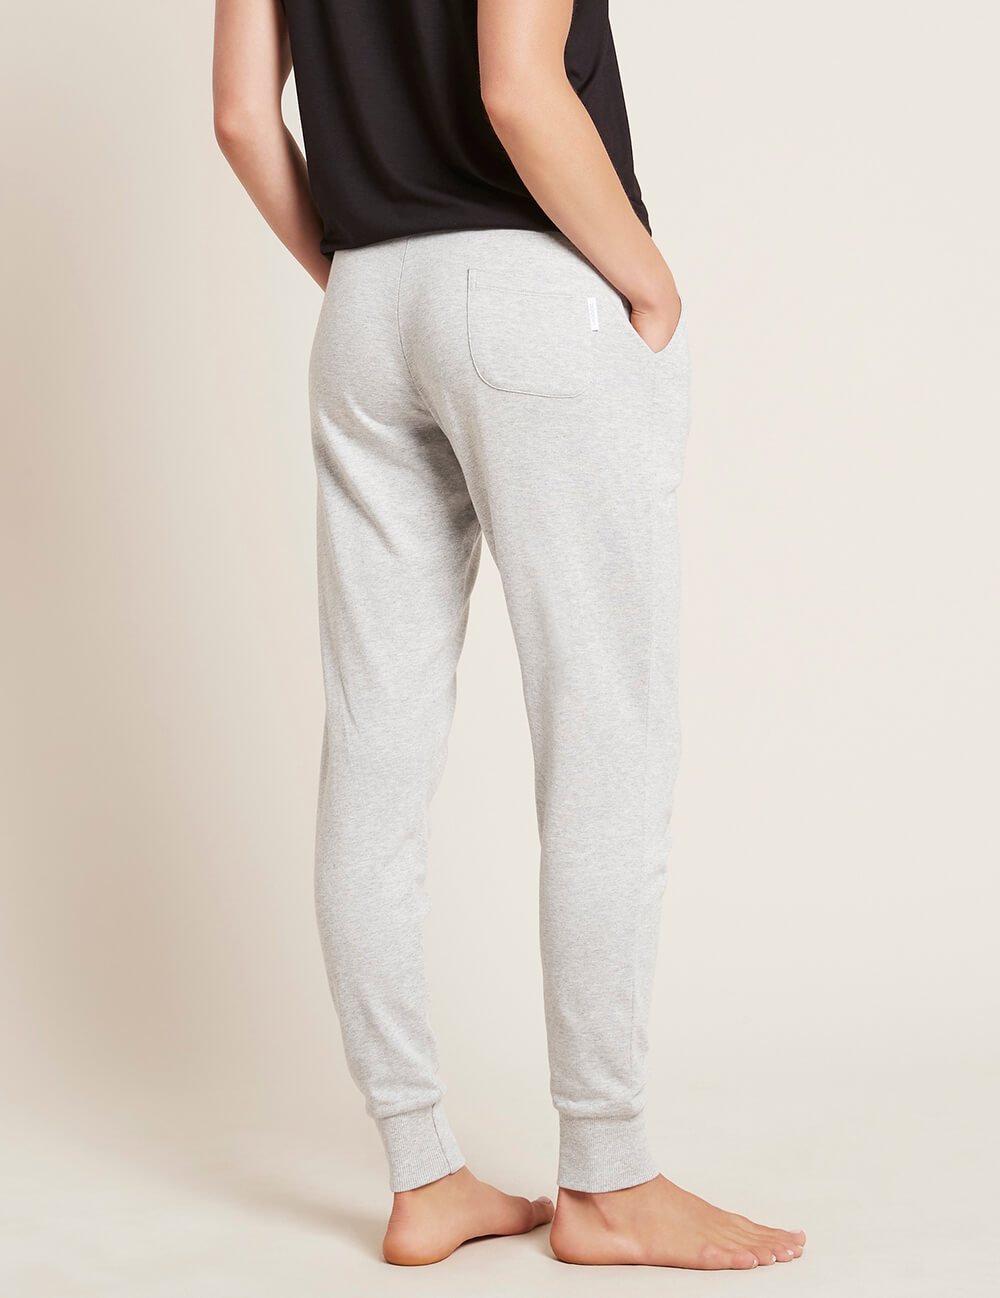 Boody Women's Weekend Jogger Pants - Provisions Mercantile